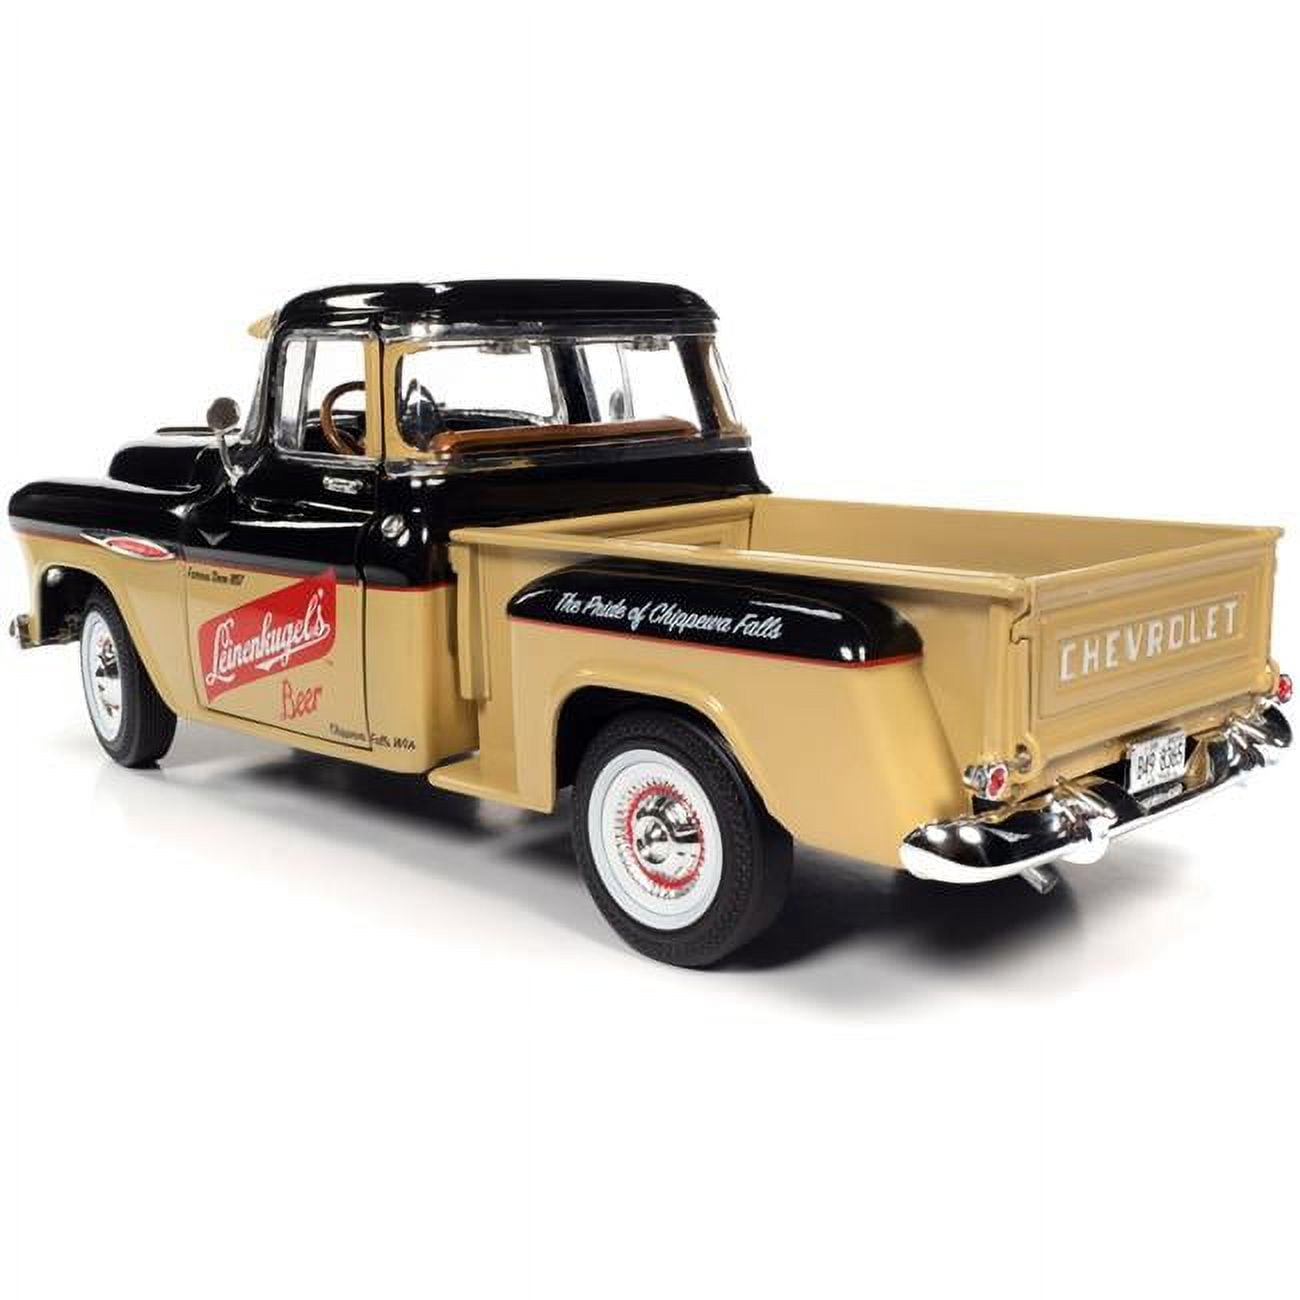 Picture of Autoworld AW311 1957 Chevrolet 3100 Stepside Pickup with Graphics Leinenkugles Beer The Pride of Chippewa Falls 1 by 18 Scale Diecast Model Truck&#44; Black & Tan